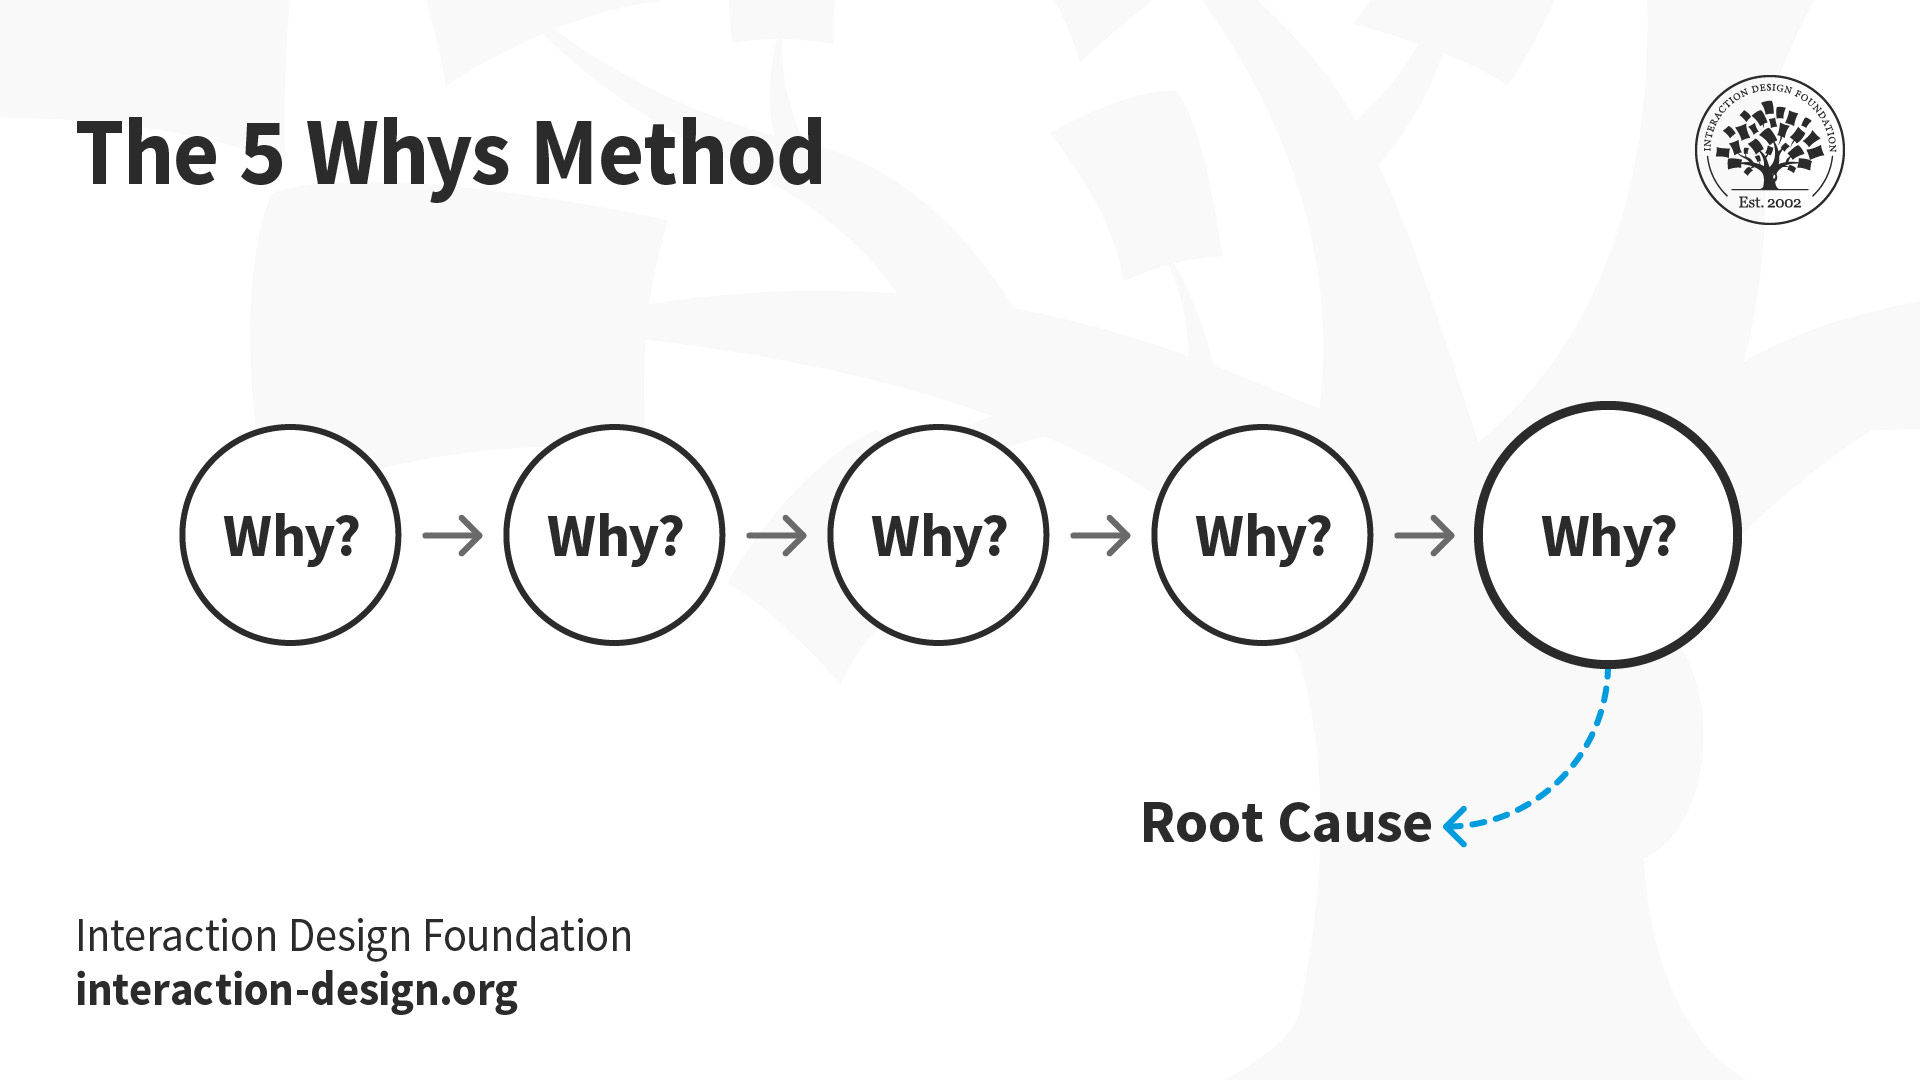 The 5 Whys Method illustrated to show 5 progressive Why questions leading towards uncovering the root cause of a problem.